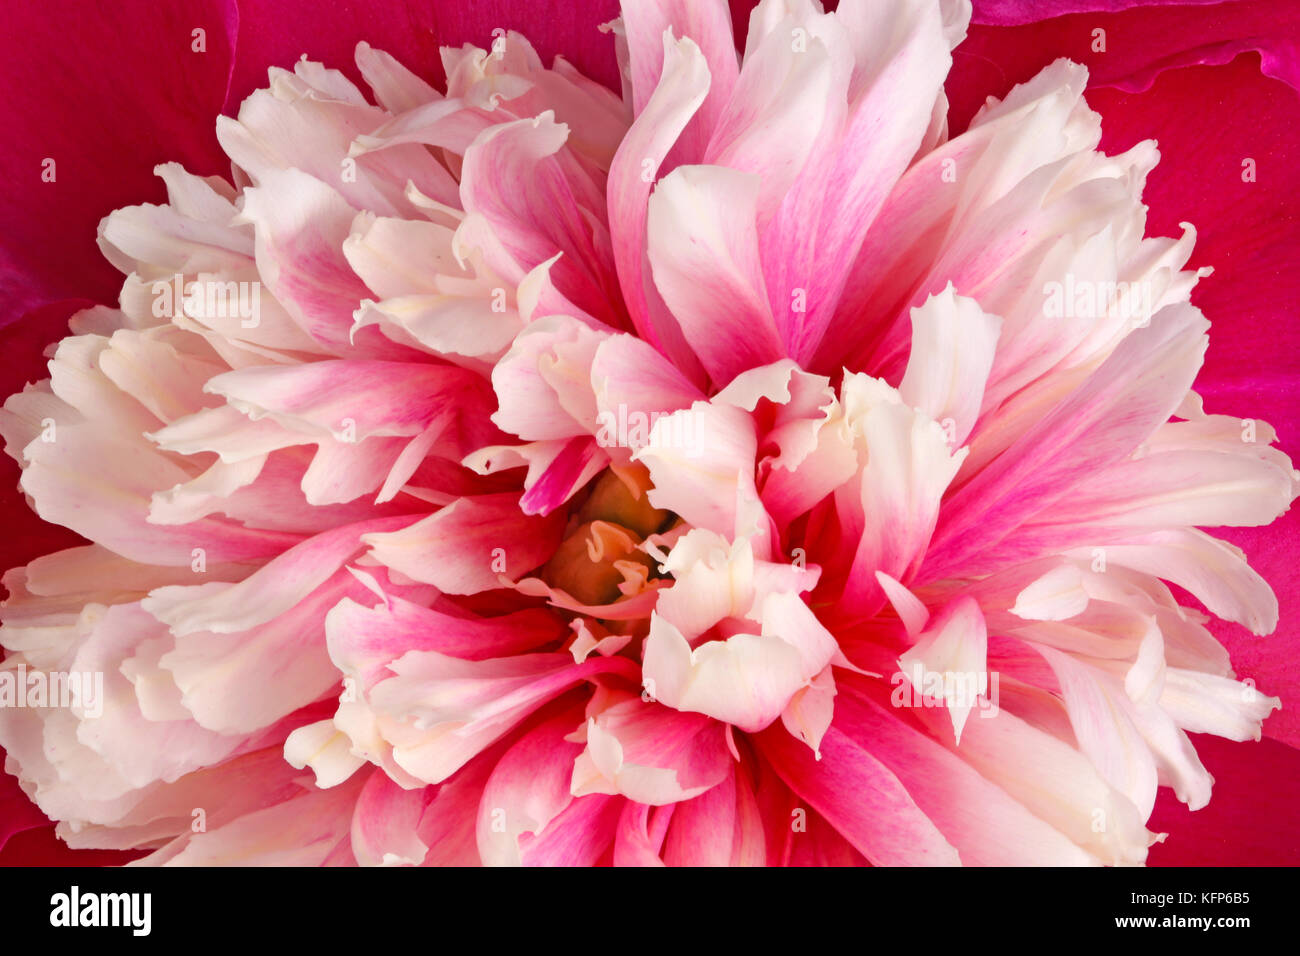 Closeup of a pink, red and white anemone-form peony (Paeonia lactiflora) flower fills the frame Stock Photo